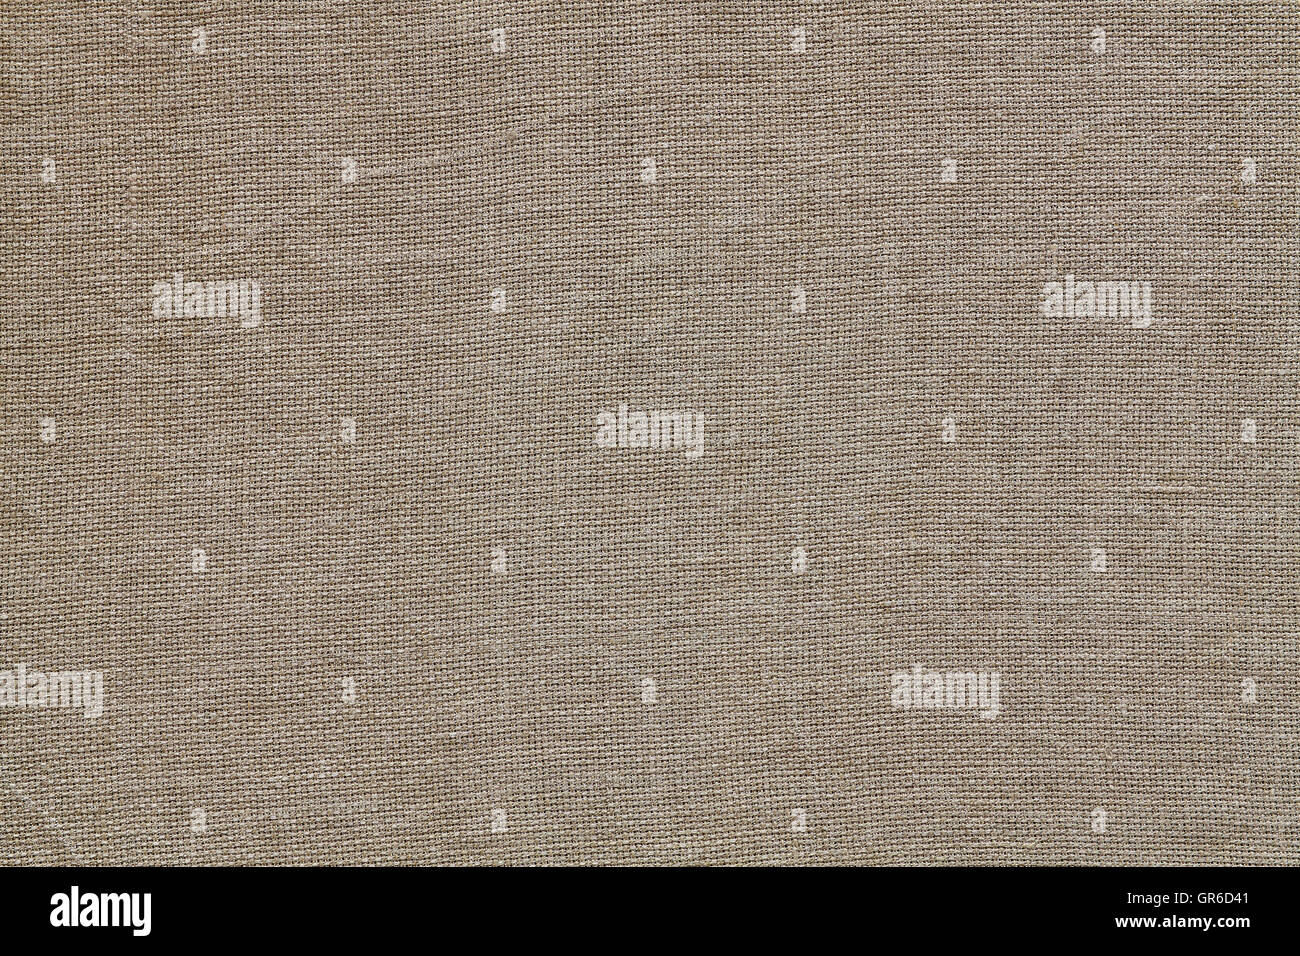 Natural linen texture or background. Stock Photo